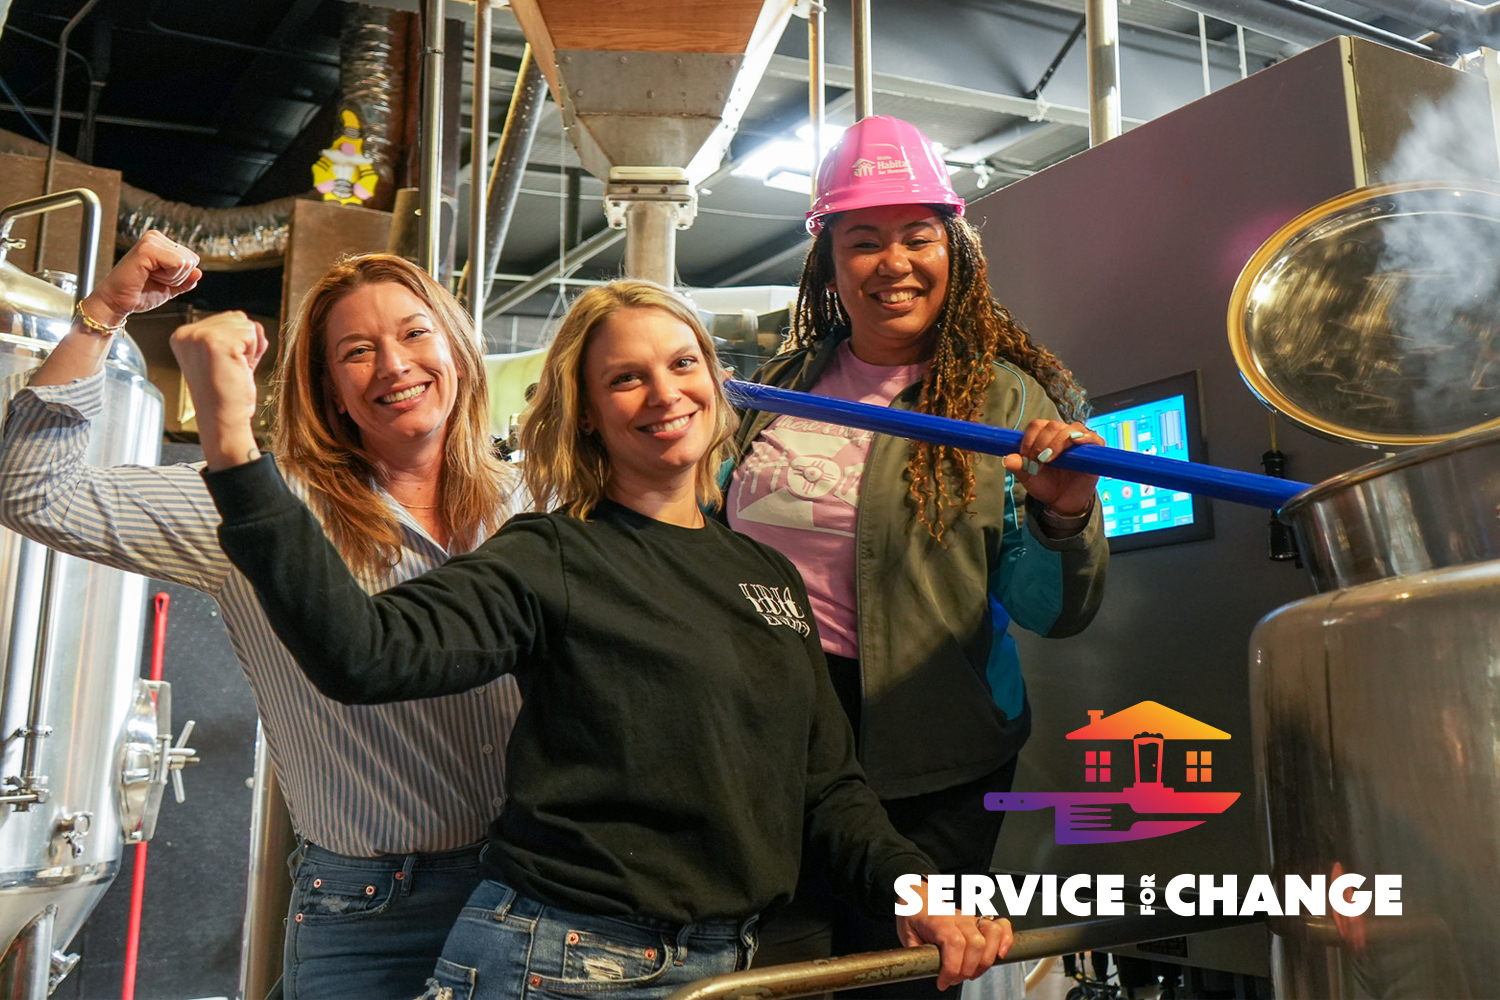 Jennifer, Stacy, and Danielle posing together next to a brewing machine with Service for Change logo.